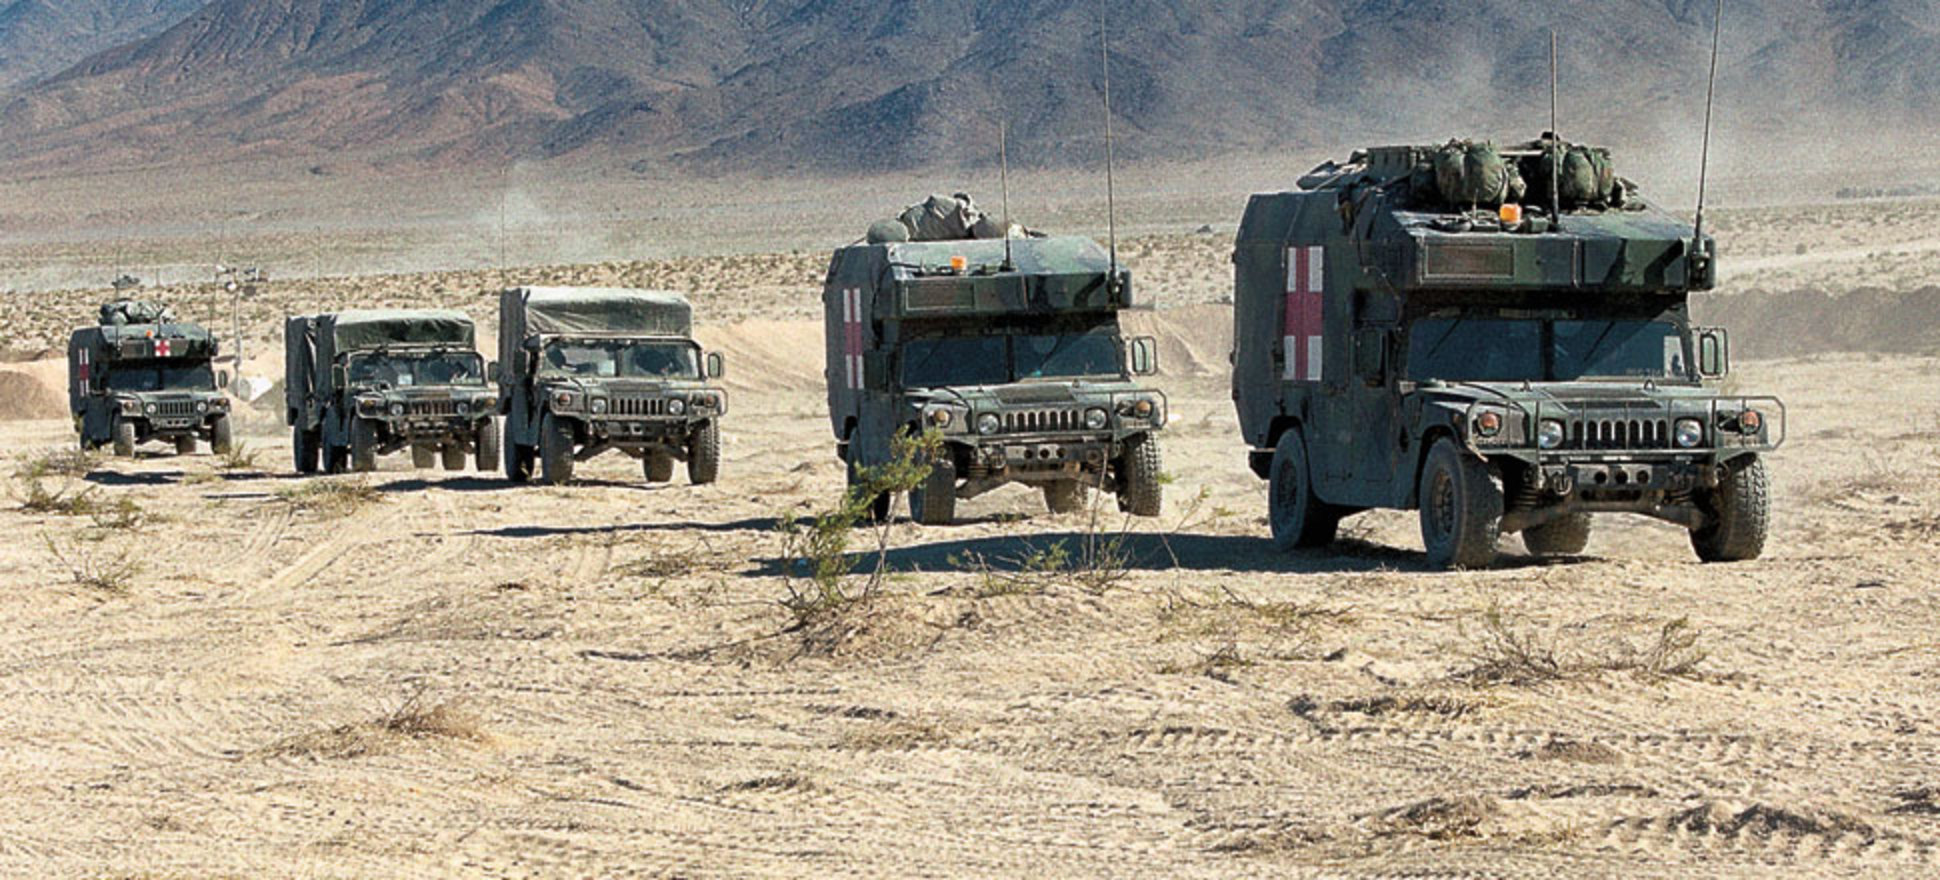 A2 Series | HMMWV (Humvee) | AM General LLC - Mobility solutions ...